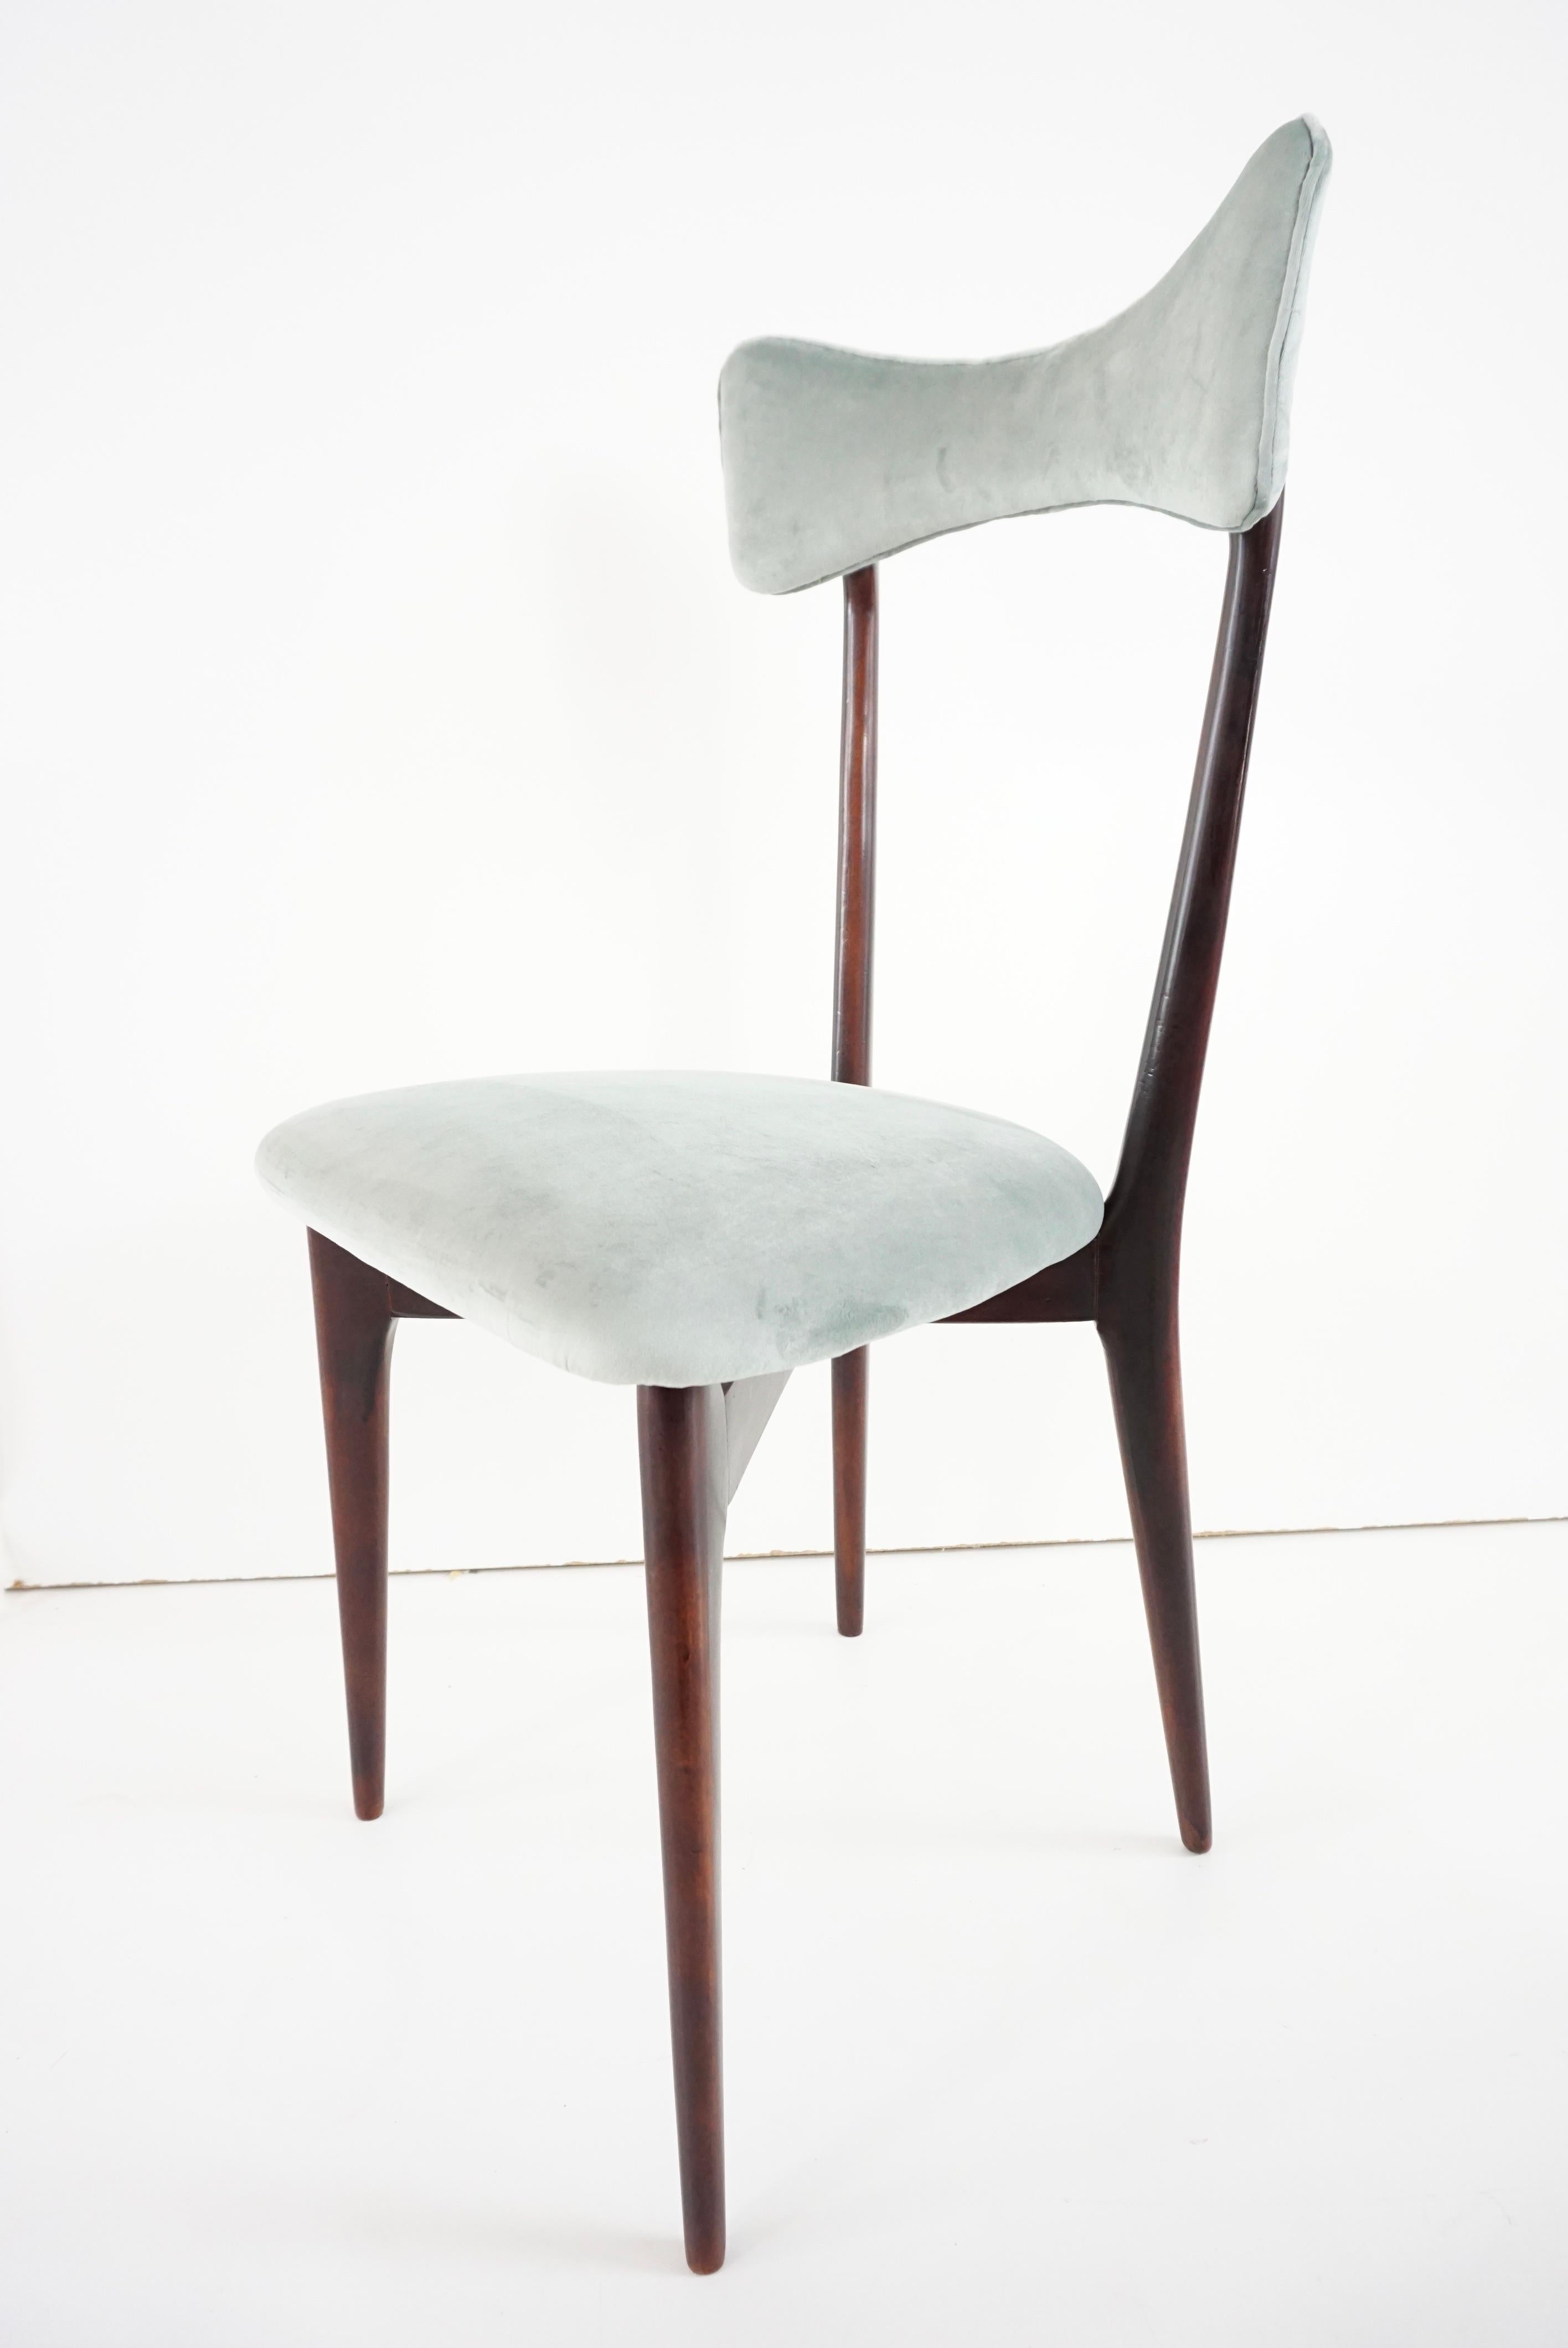 Set of Six Ico and Luisa Parisi Dining Chairs by Ariberto Colombo, 1952 For Sale 6